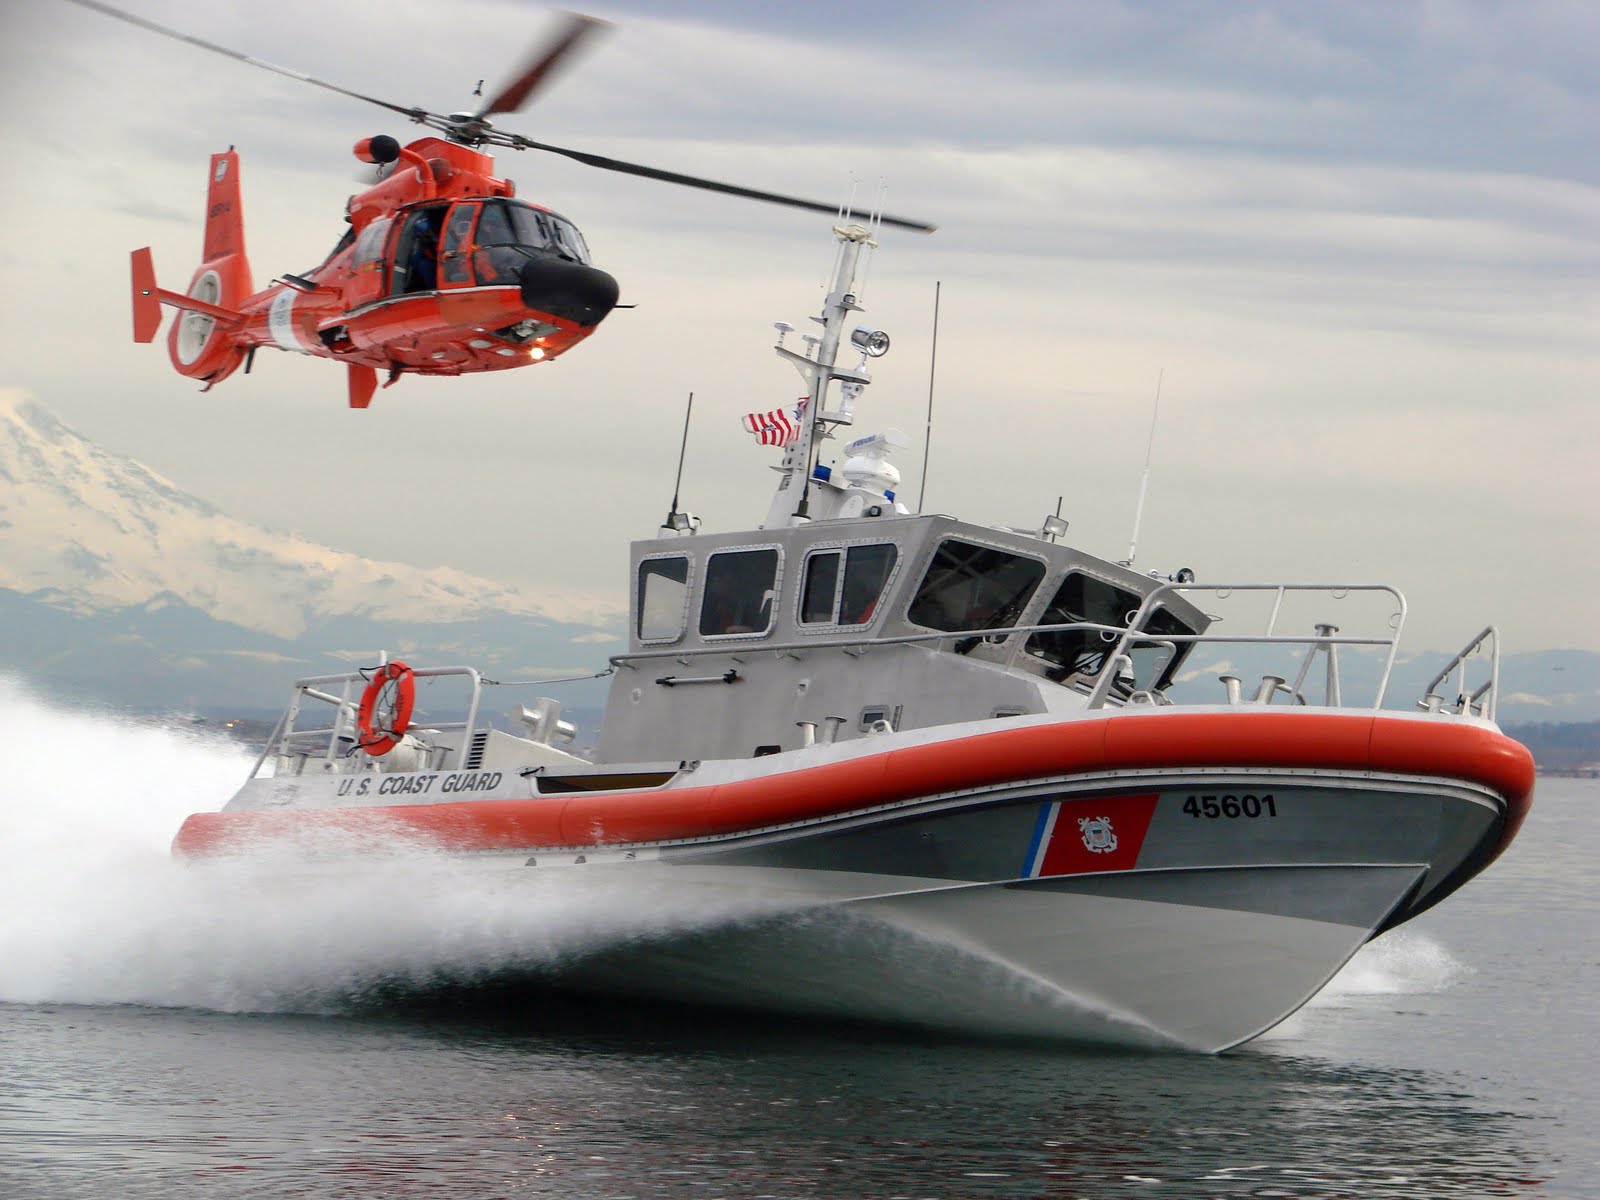 USCG Helicopter & Boat